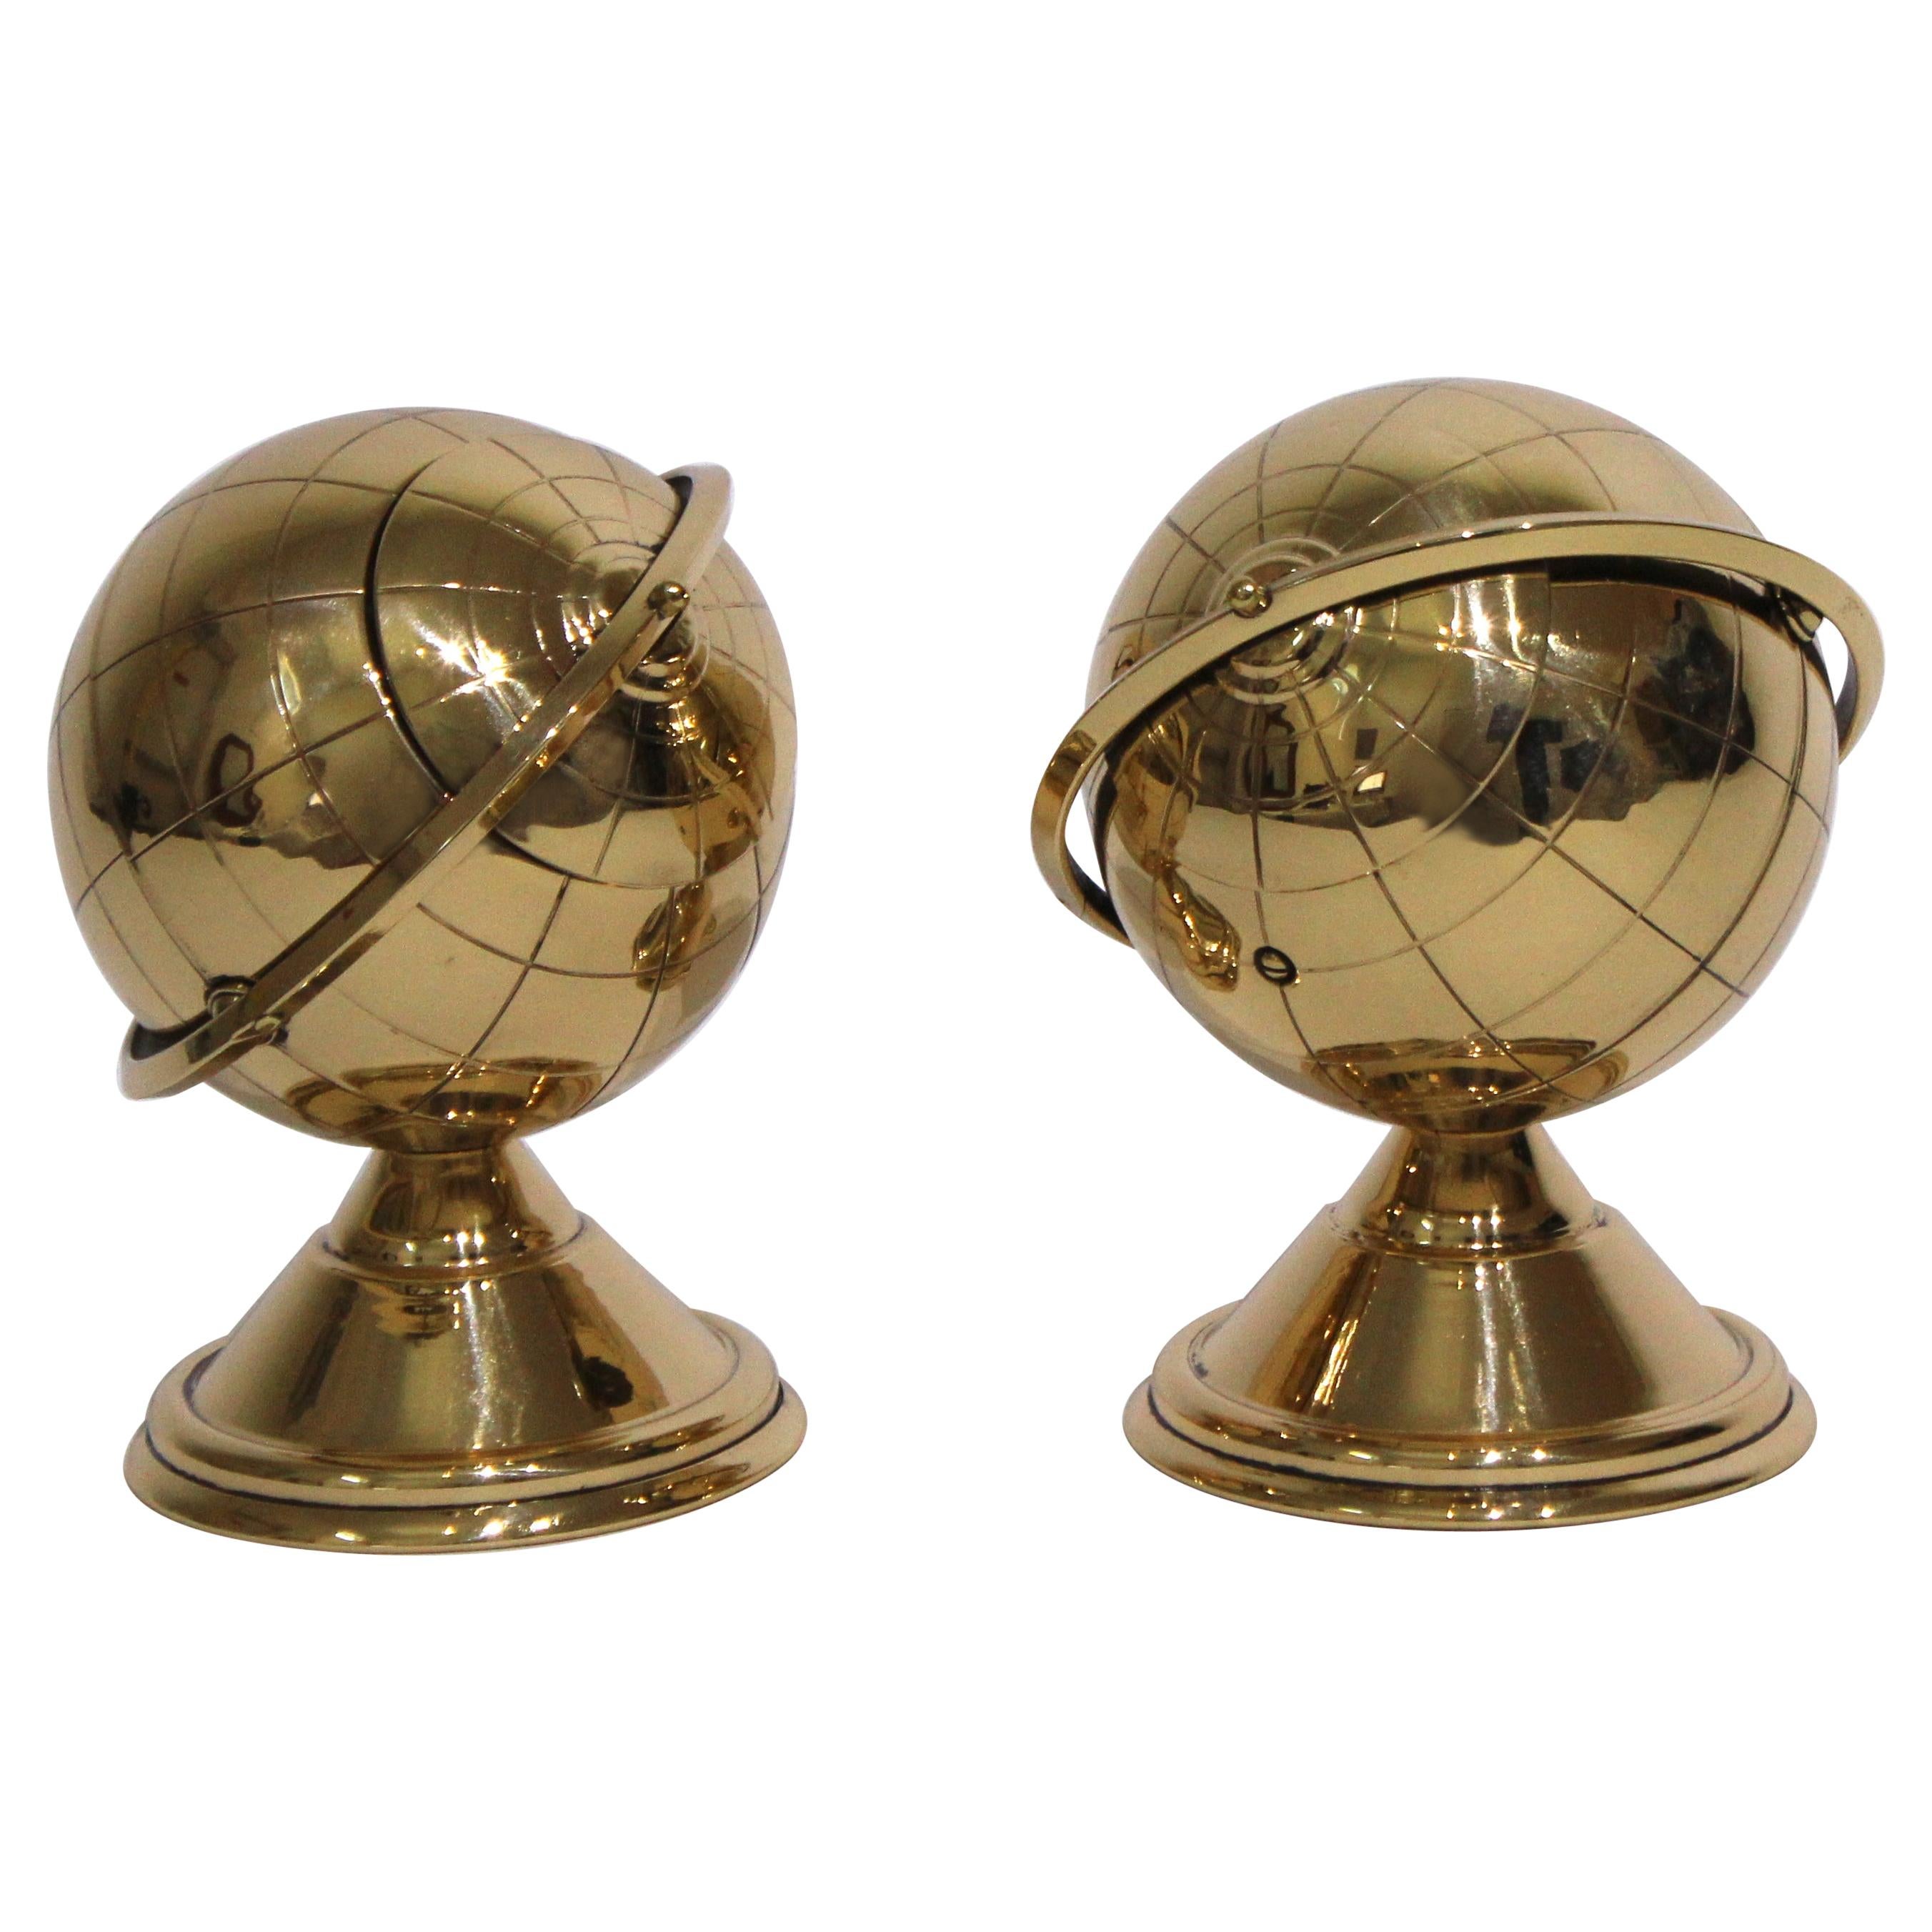 Set of Two Brass Globe Ash Tray & Cigarette Holders